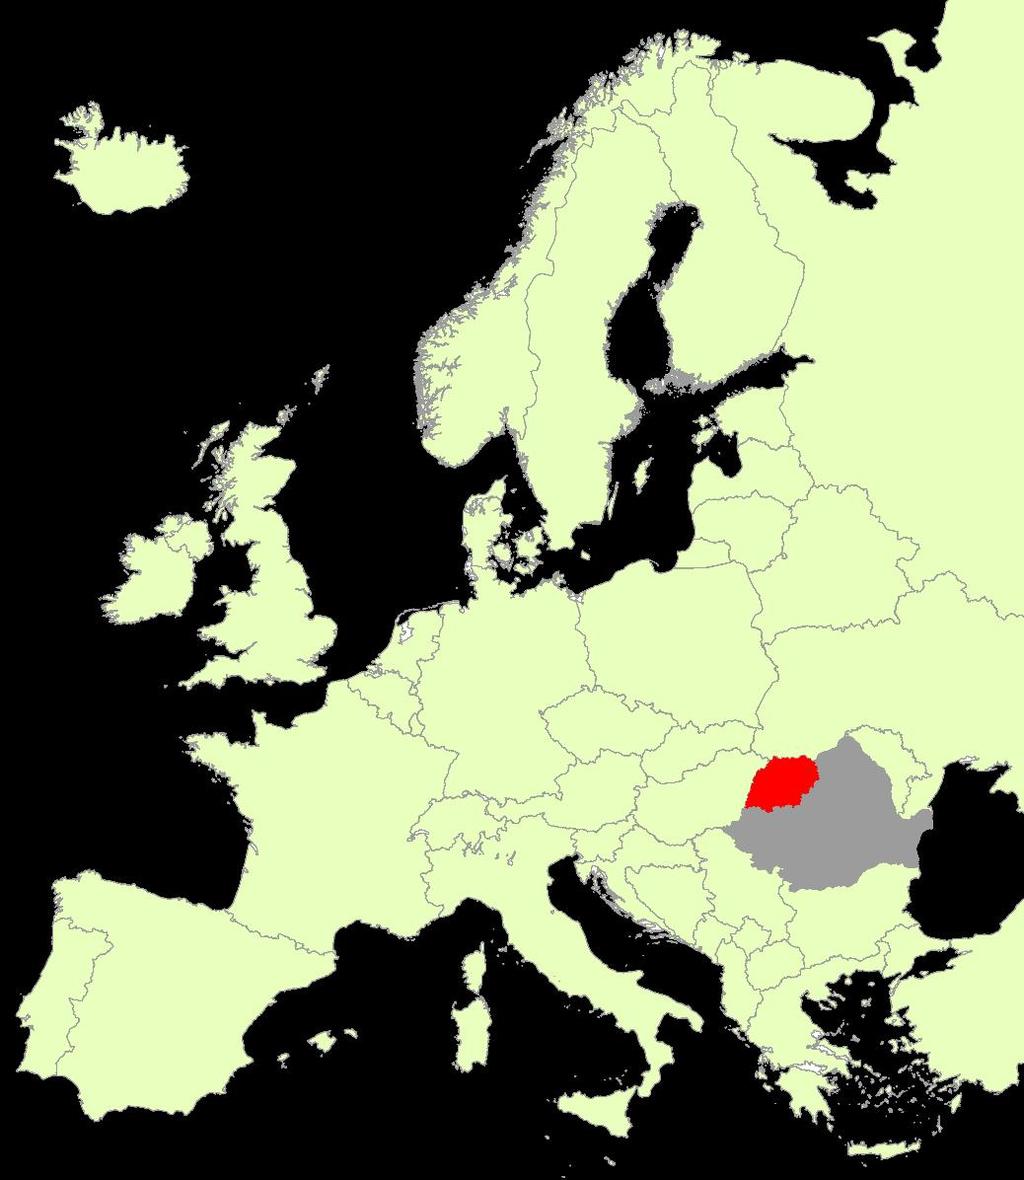 The North-West Development Region of Romania one of the 8 regions